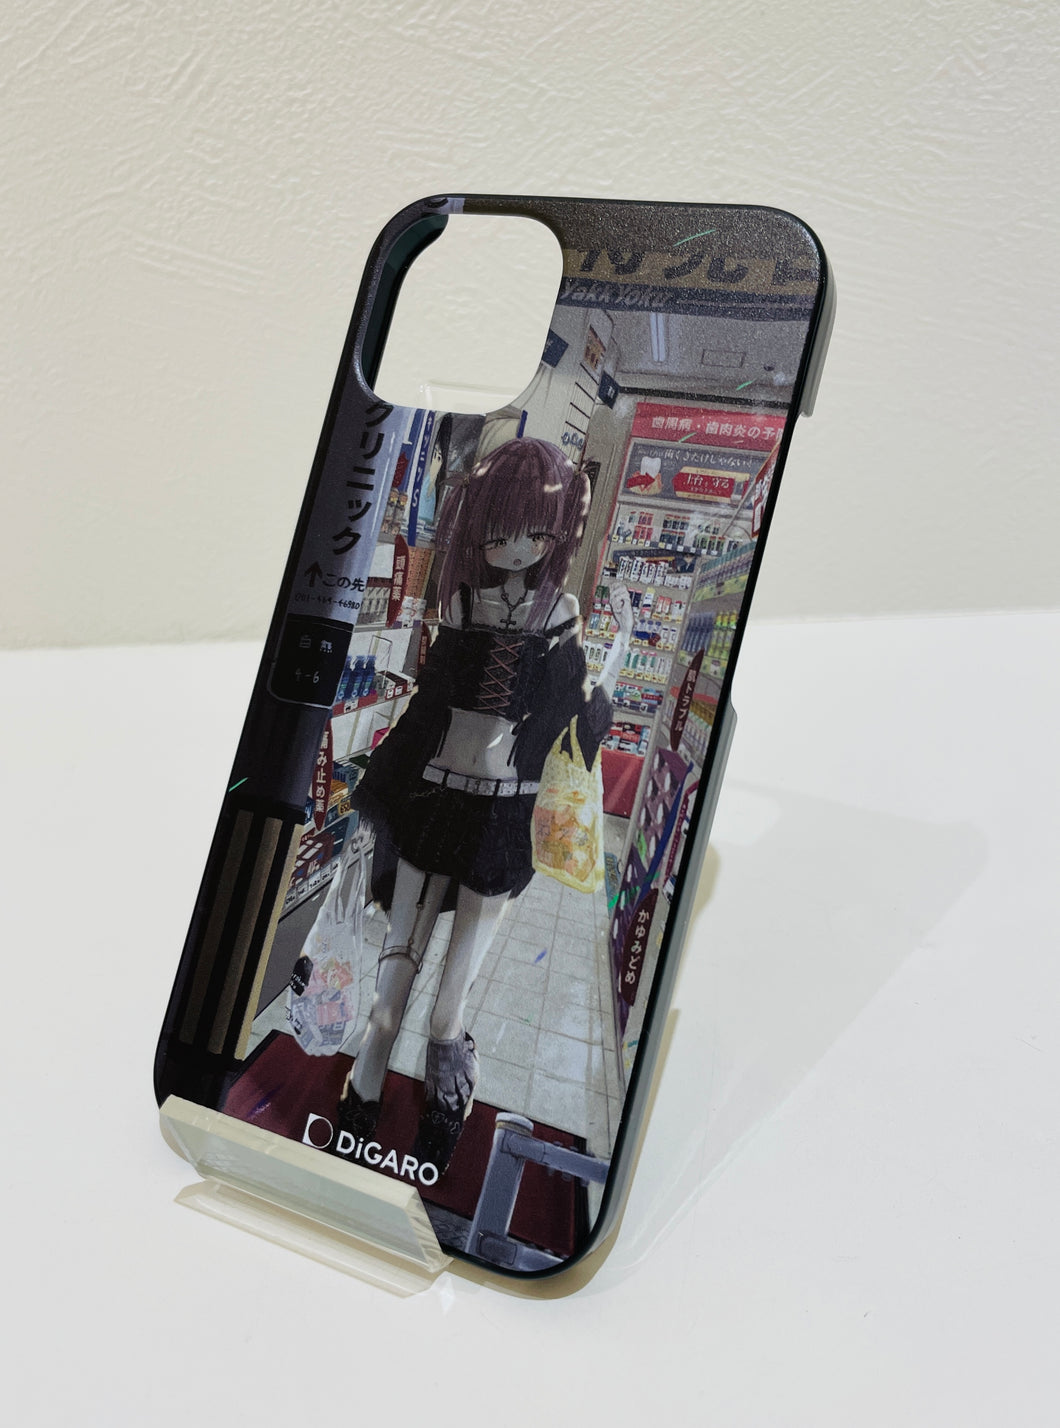 "I want to quickly become okay." Shina DiGARO Limited Smartphone Case -Galaxy Series-